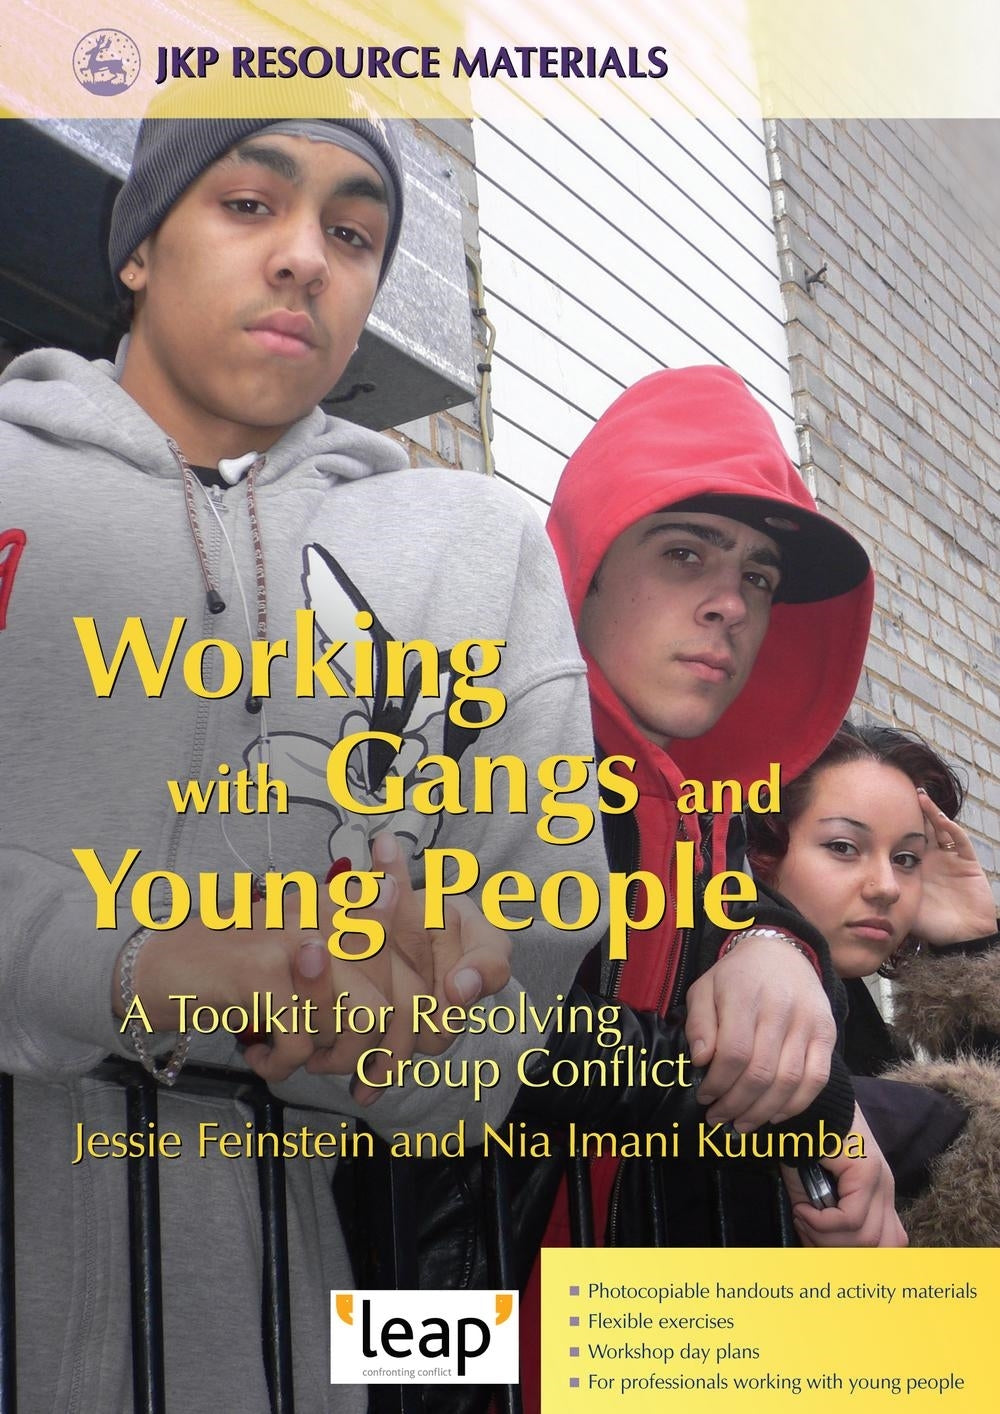 Working with Gangs and Young People by Imani Kuumba, Jessie Feinstein